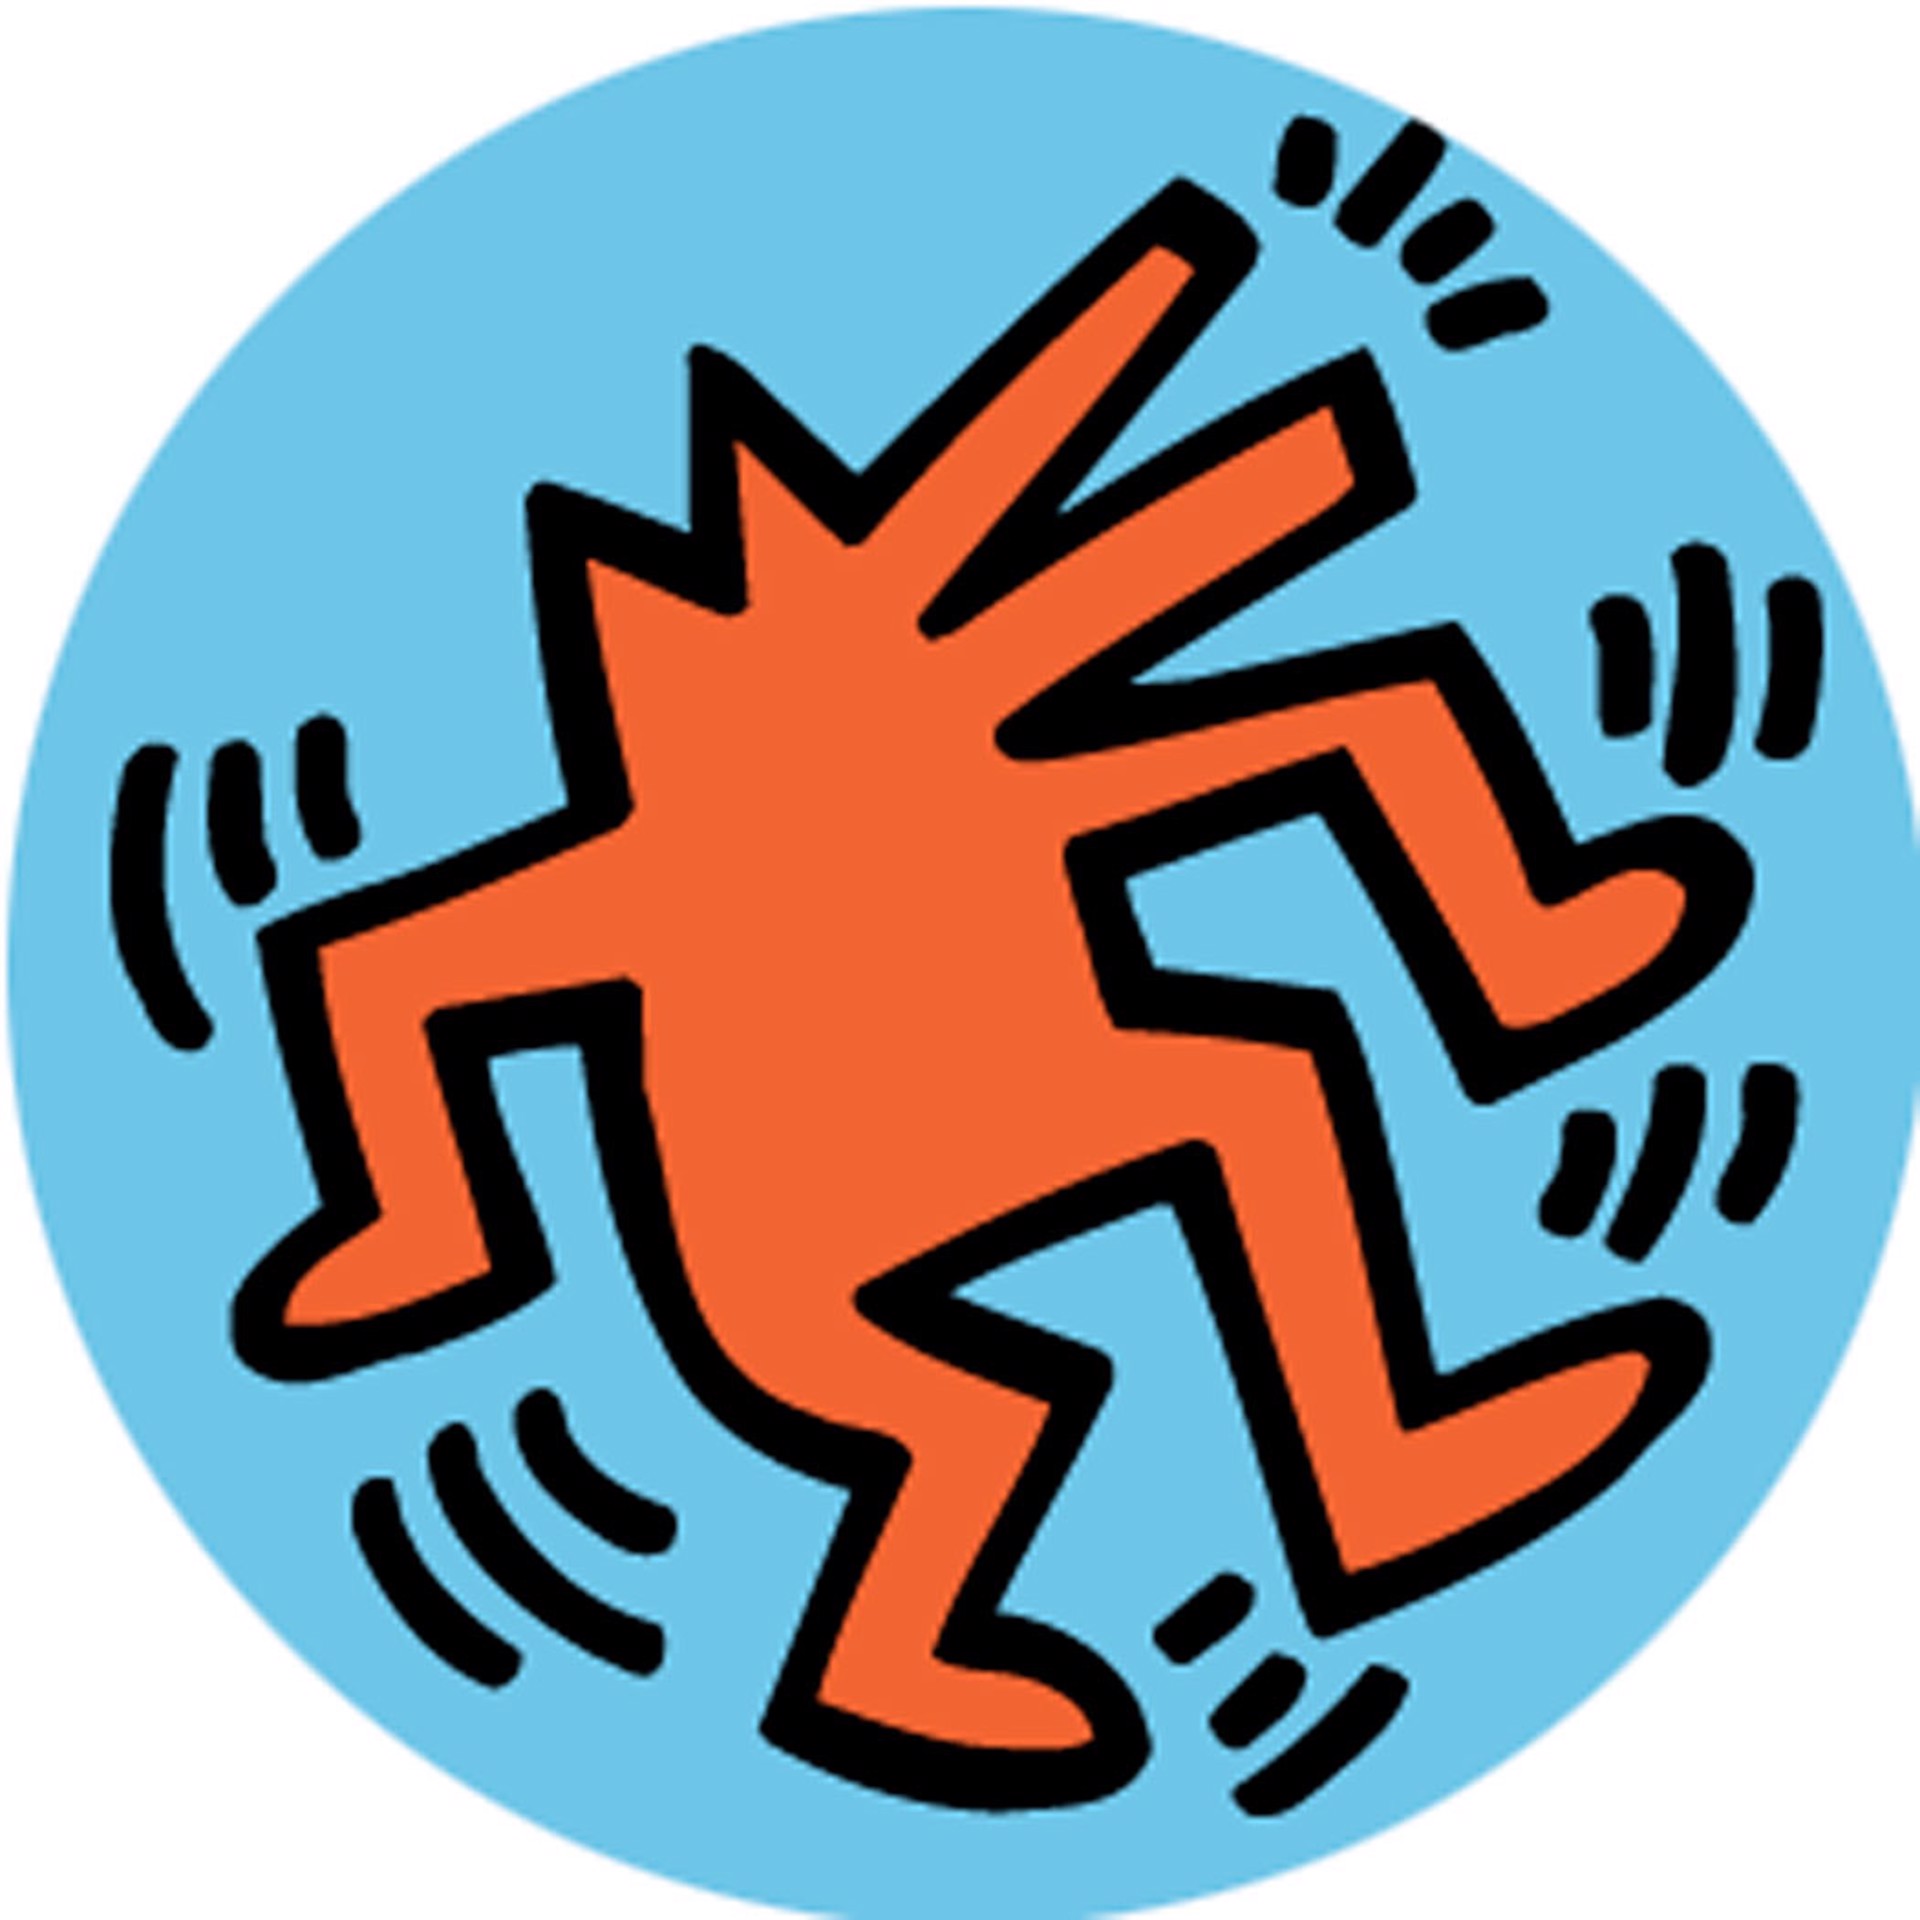 Keith Haring Orange Werewolf on Blue 1 Inch Pin by Keith Haring